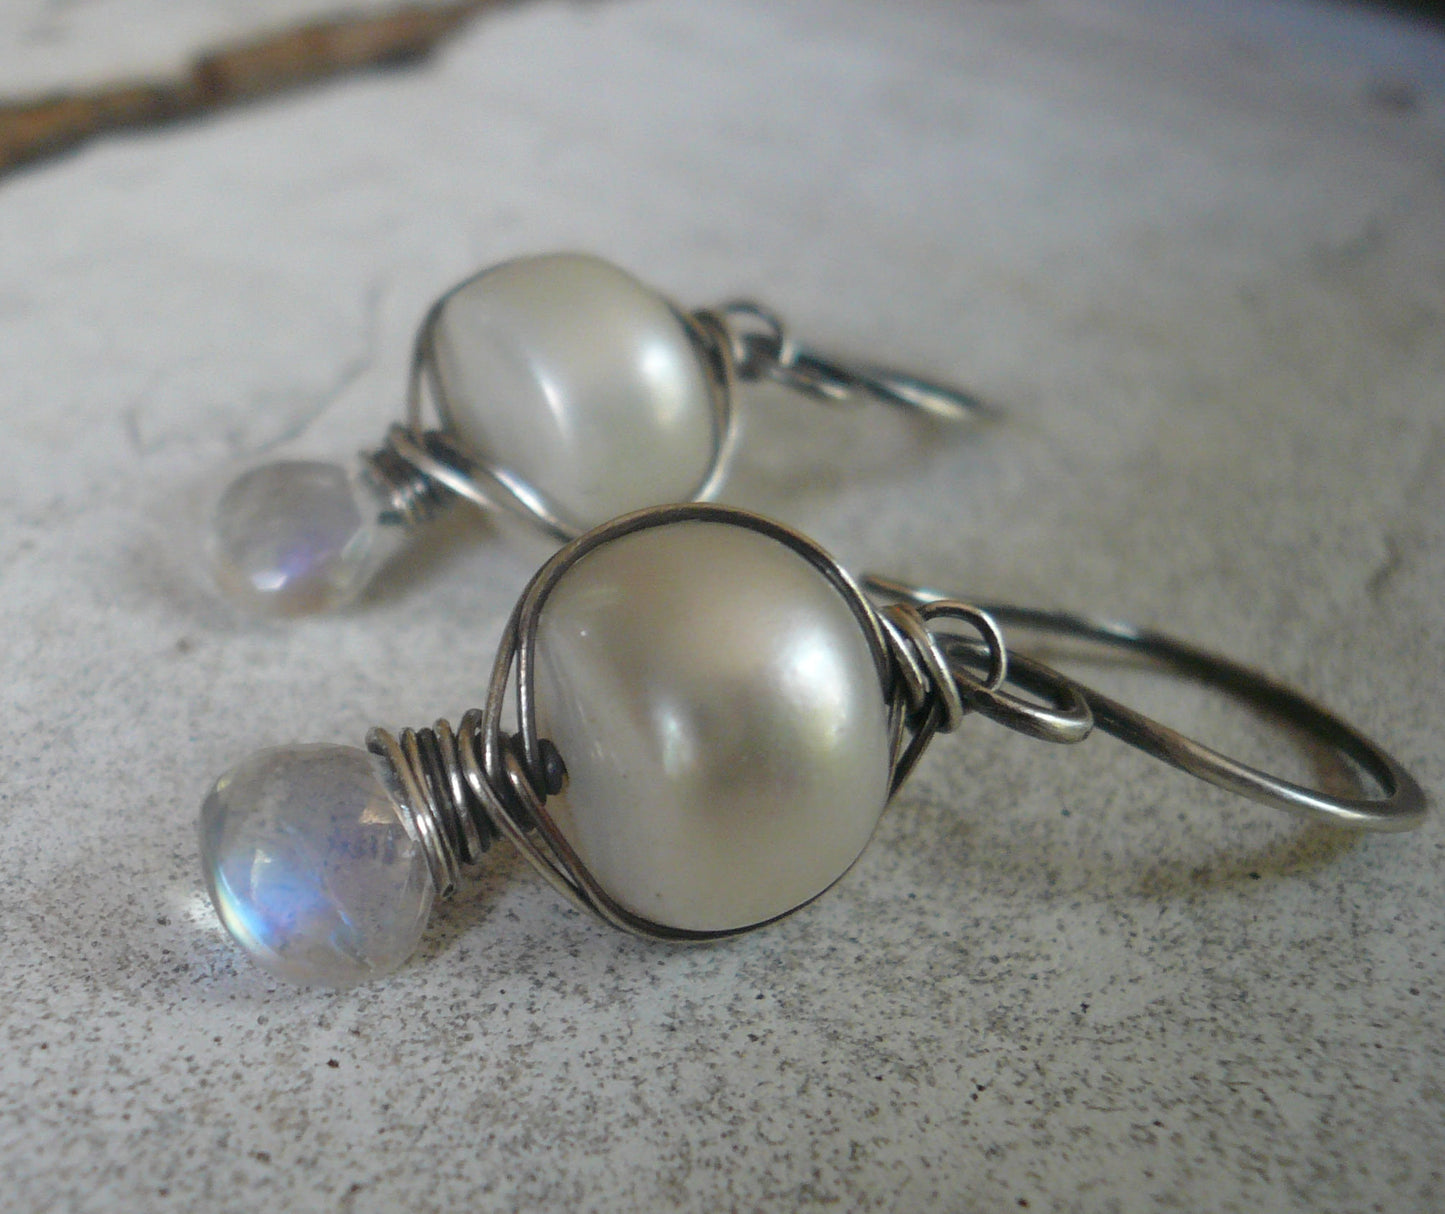 Scintilla - Oxidized sterling silver dangle Earrings. Wire Wrapped freshwater pearls and Moonstone. Handmade